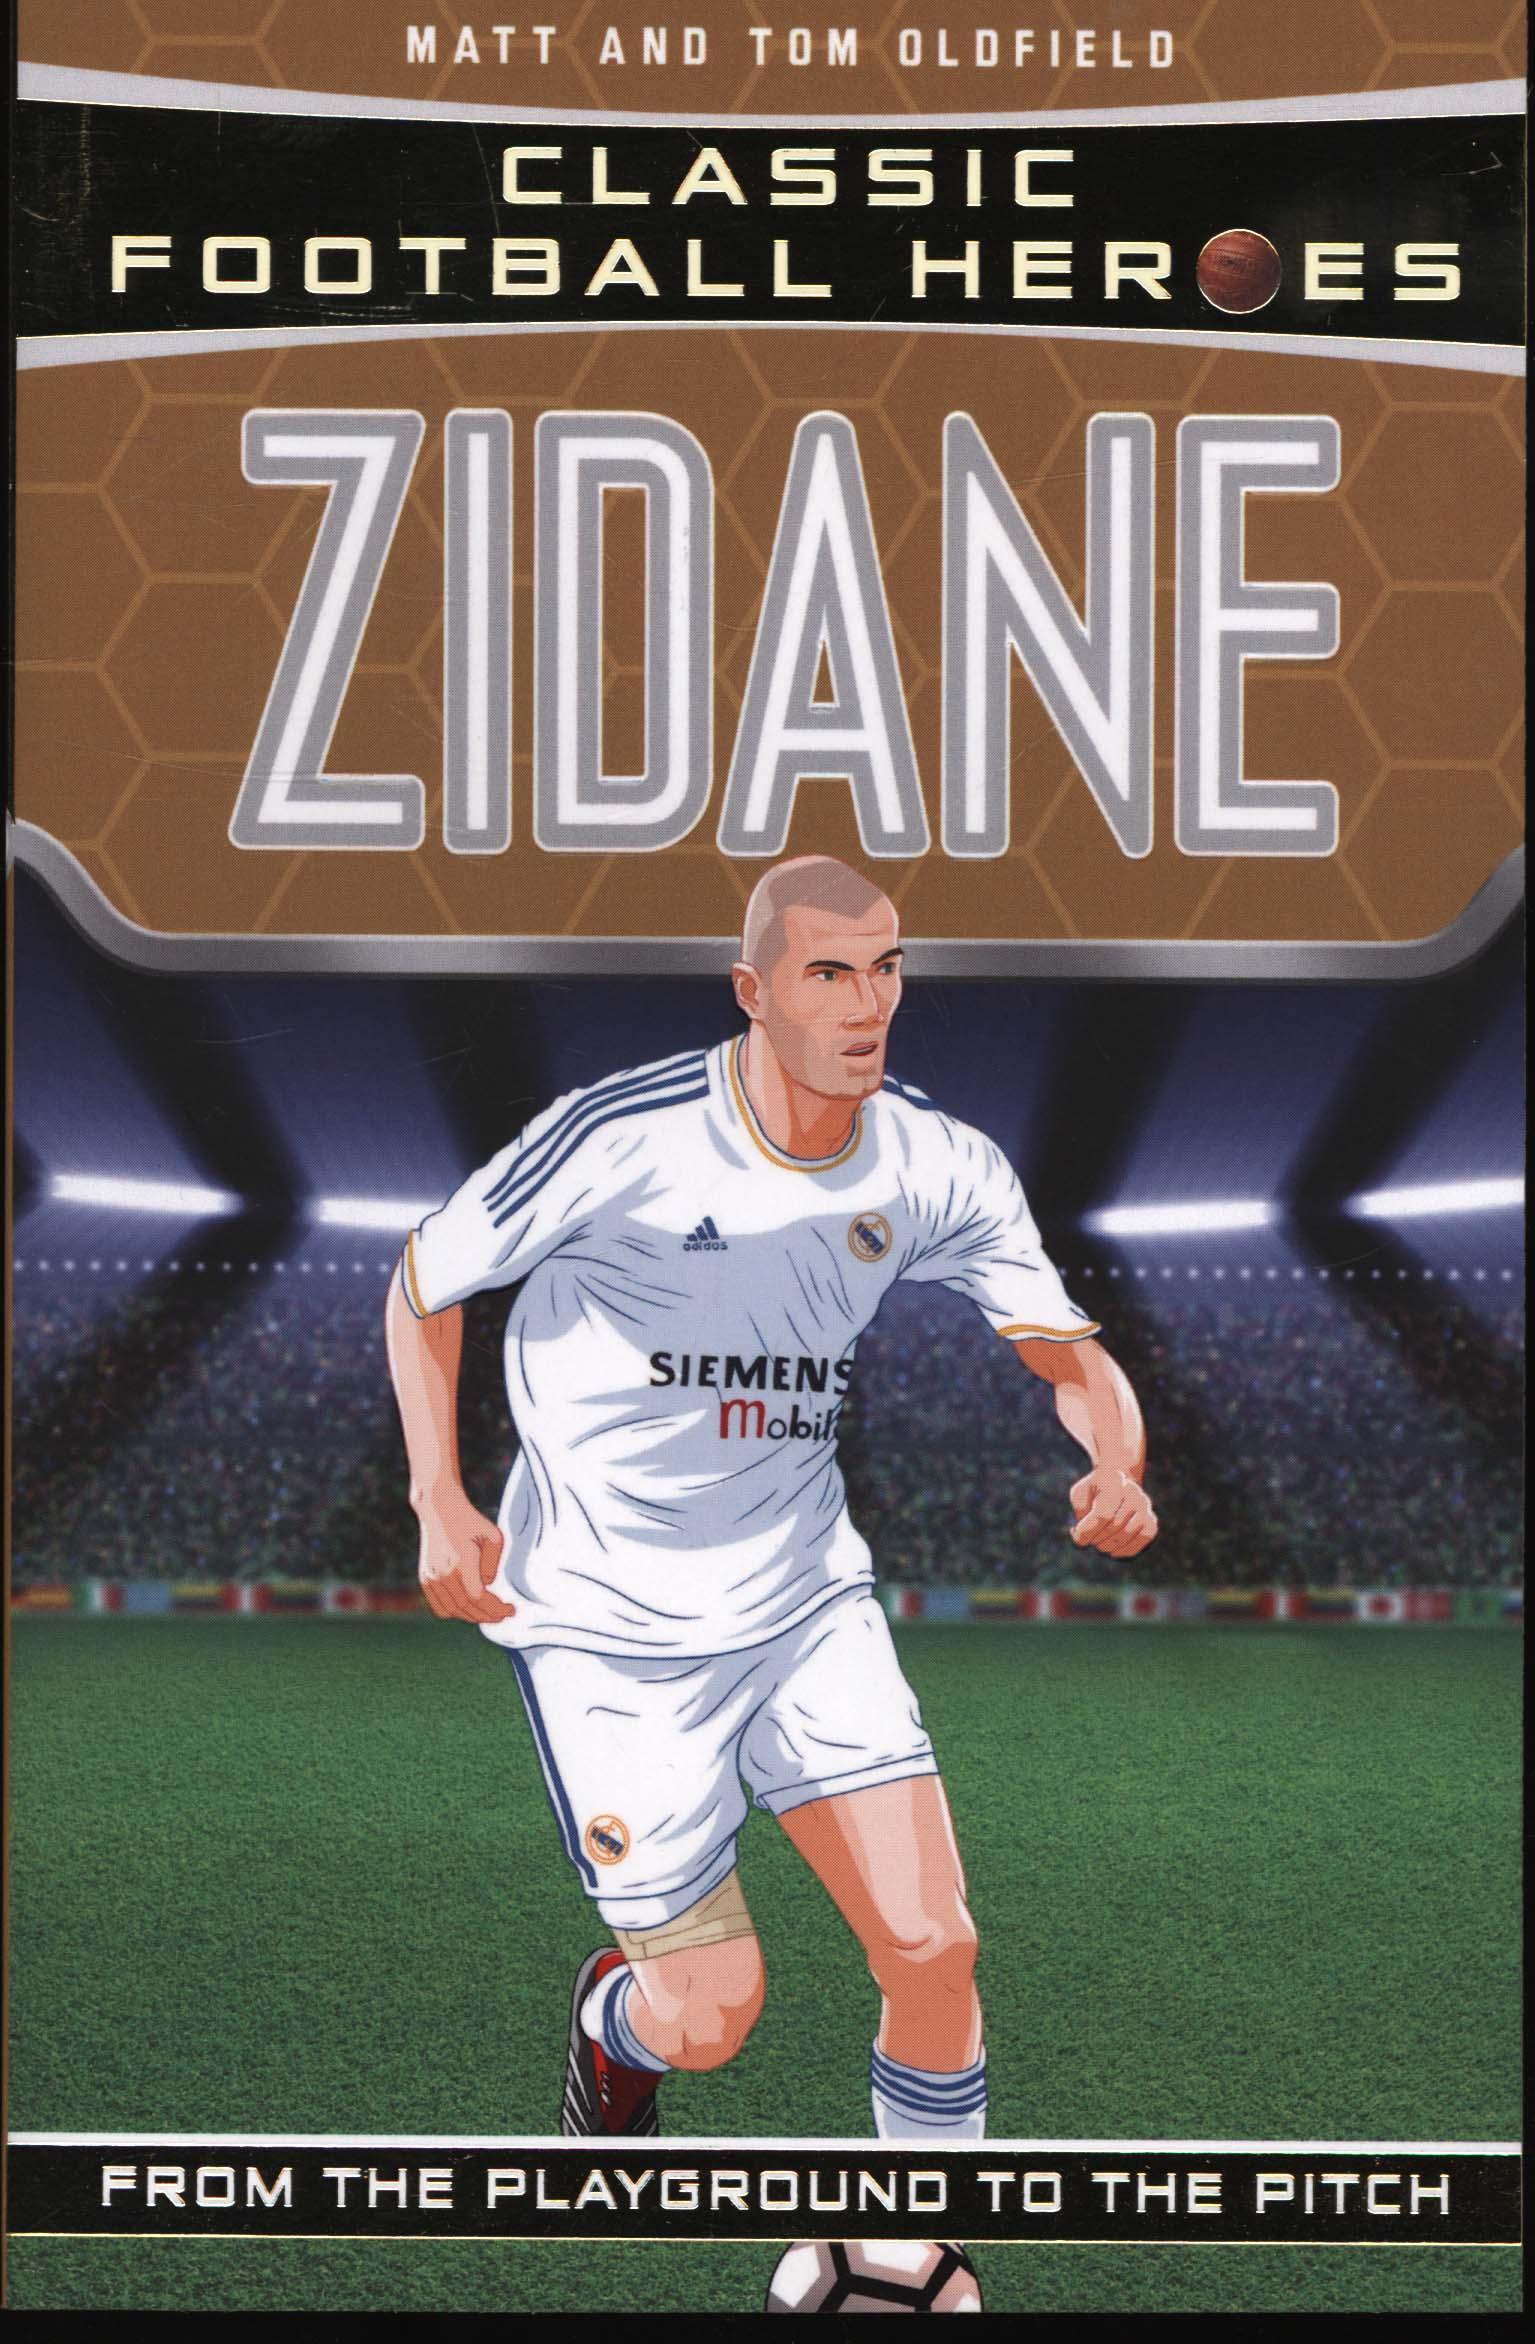 Zidane (Classic Football Heroes) - Collect Them All!